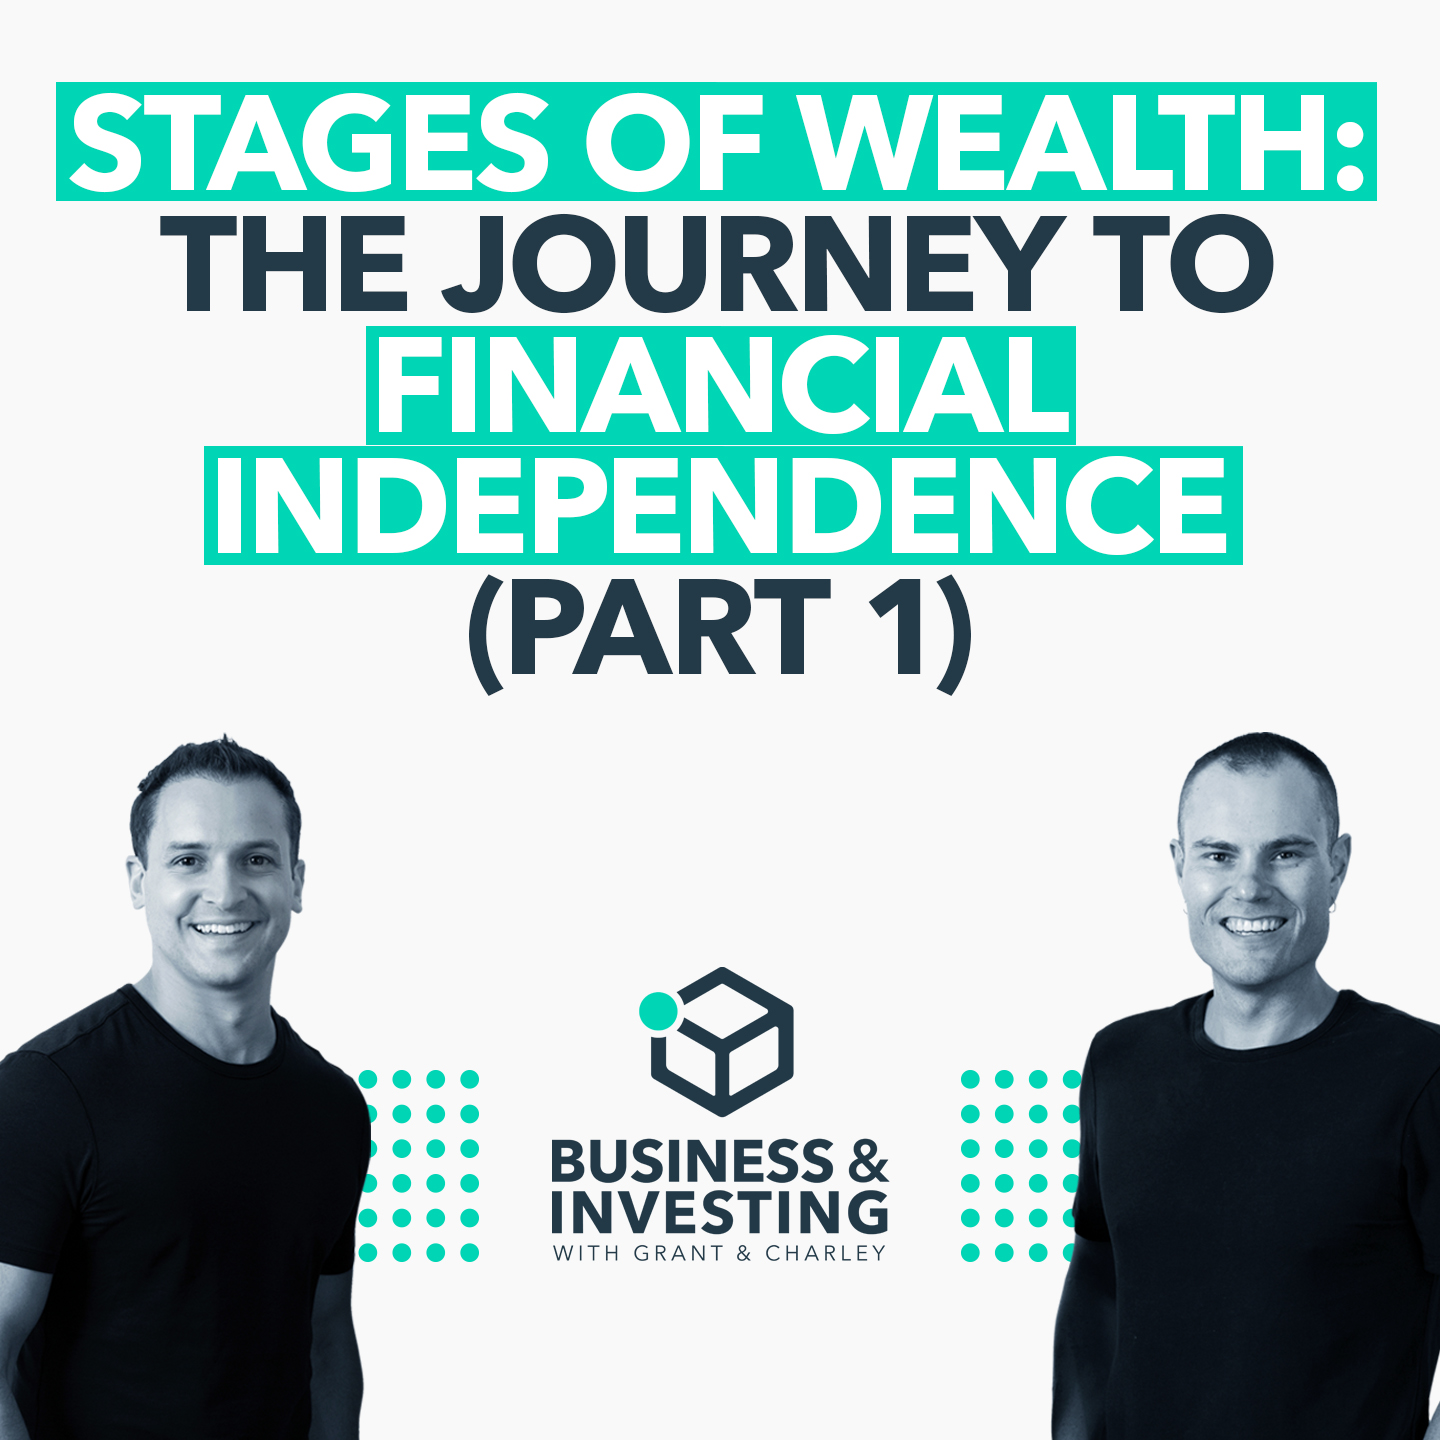 Stages of Wealth: The Journey to Financial Independence (Part 1)